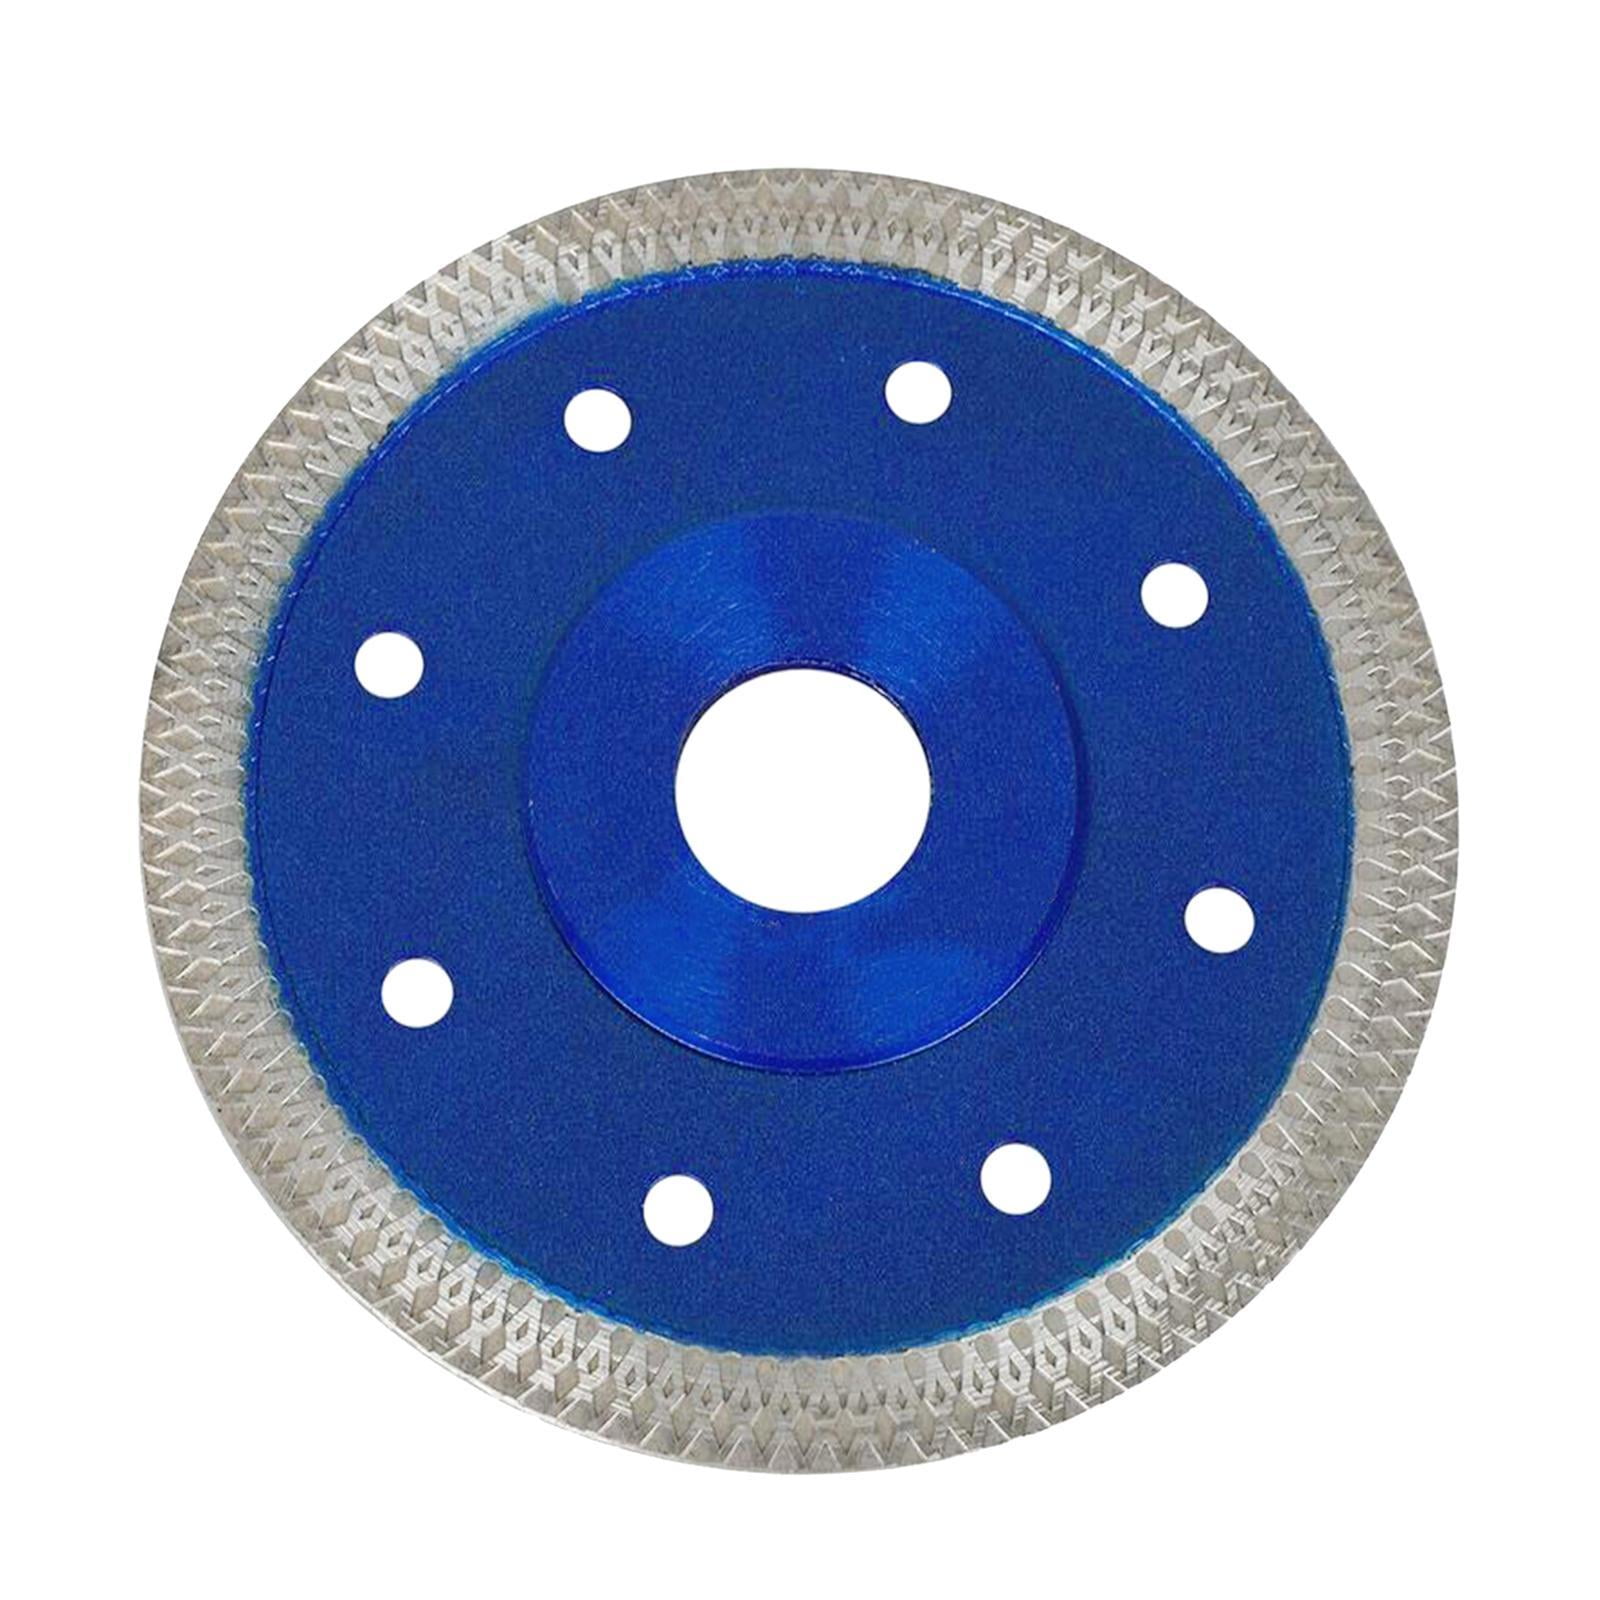 115mm Thin Turbo Diamond Saw Blade Cutting Disc Concrete Stone For Angle Grinder 